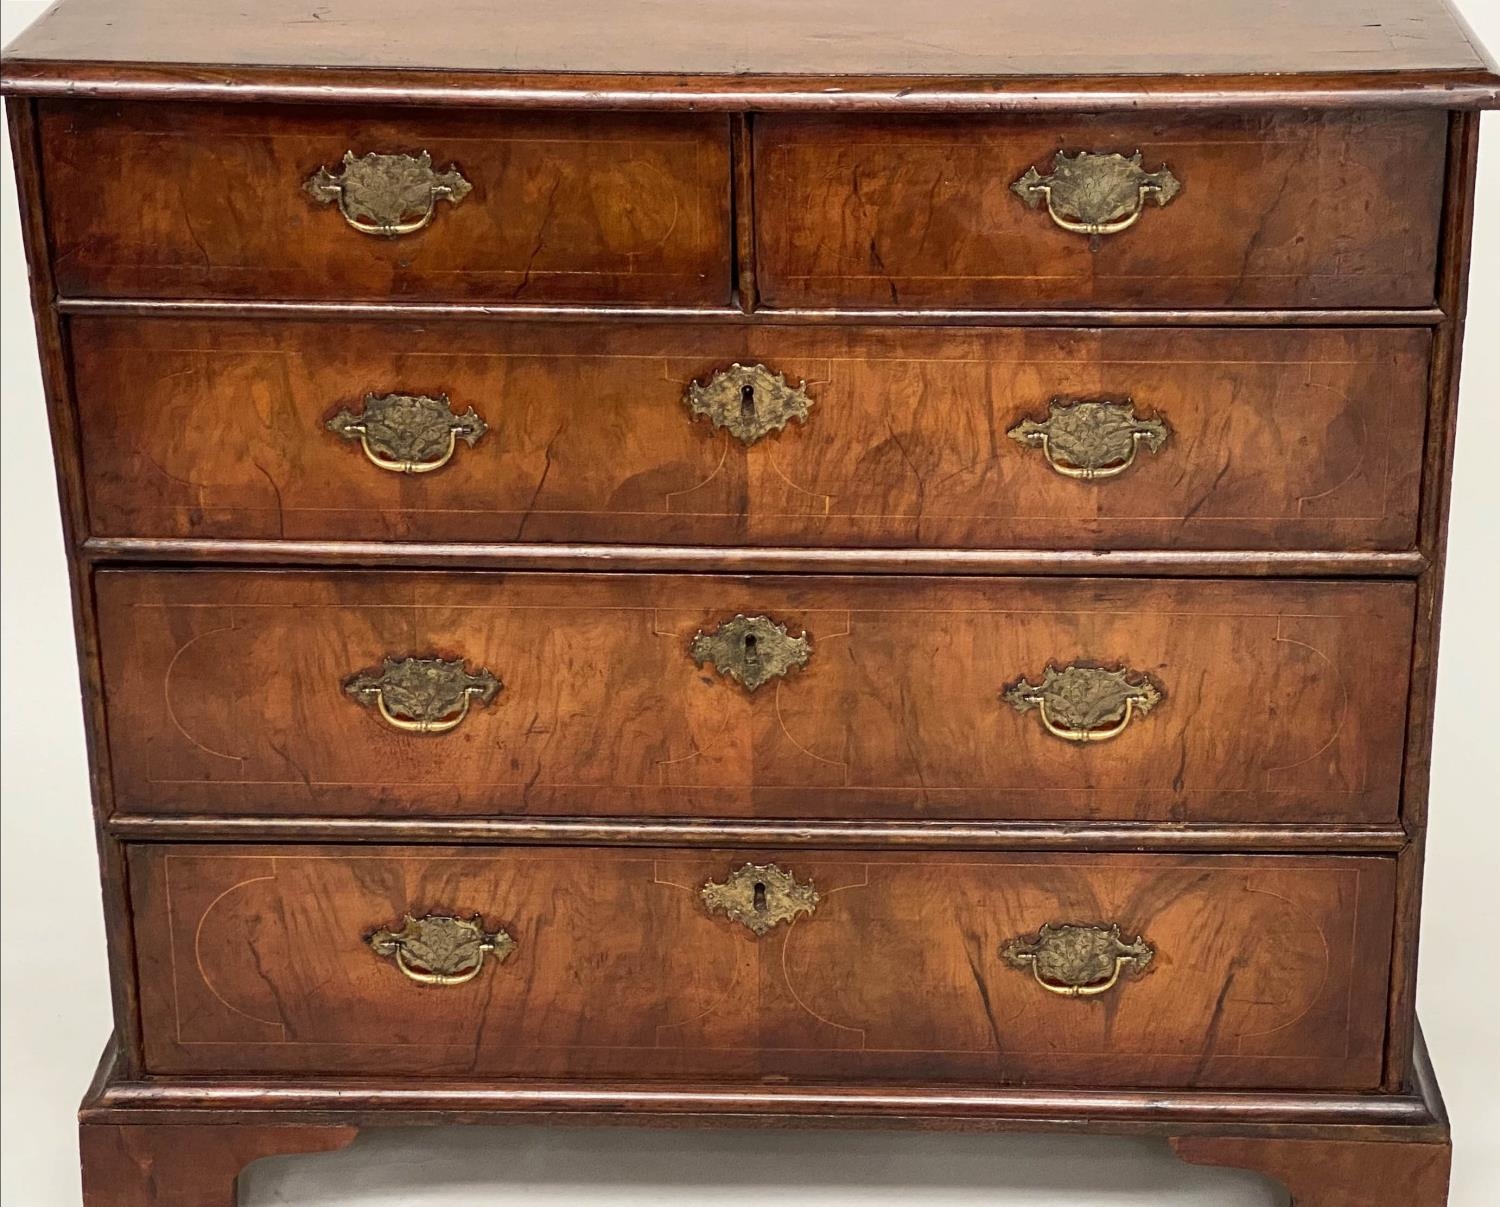 CHEST, early 18th century English Queen Anne figured walnut with two short and three long drawers, - Image 2 of 9